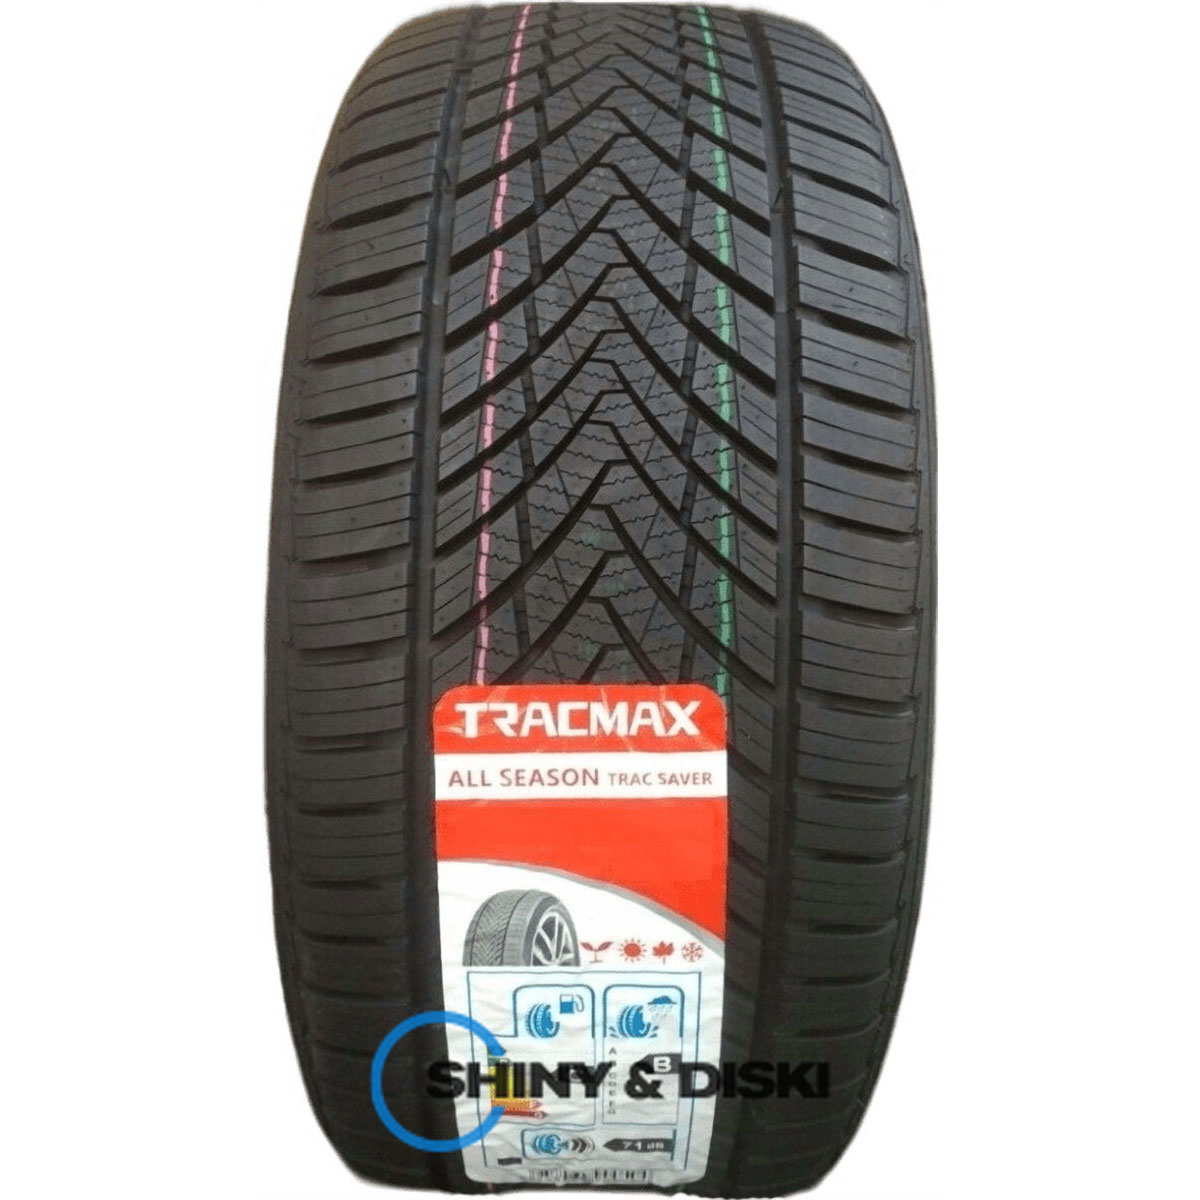 покрышки tracmax a/s trac saver 215/70 r16 100h